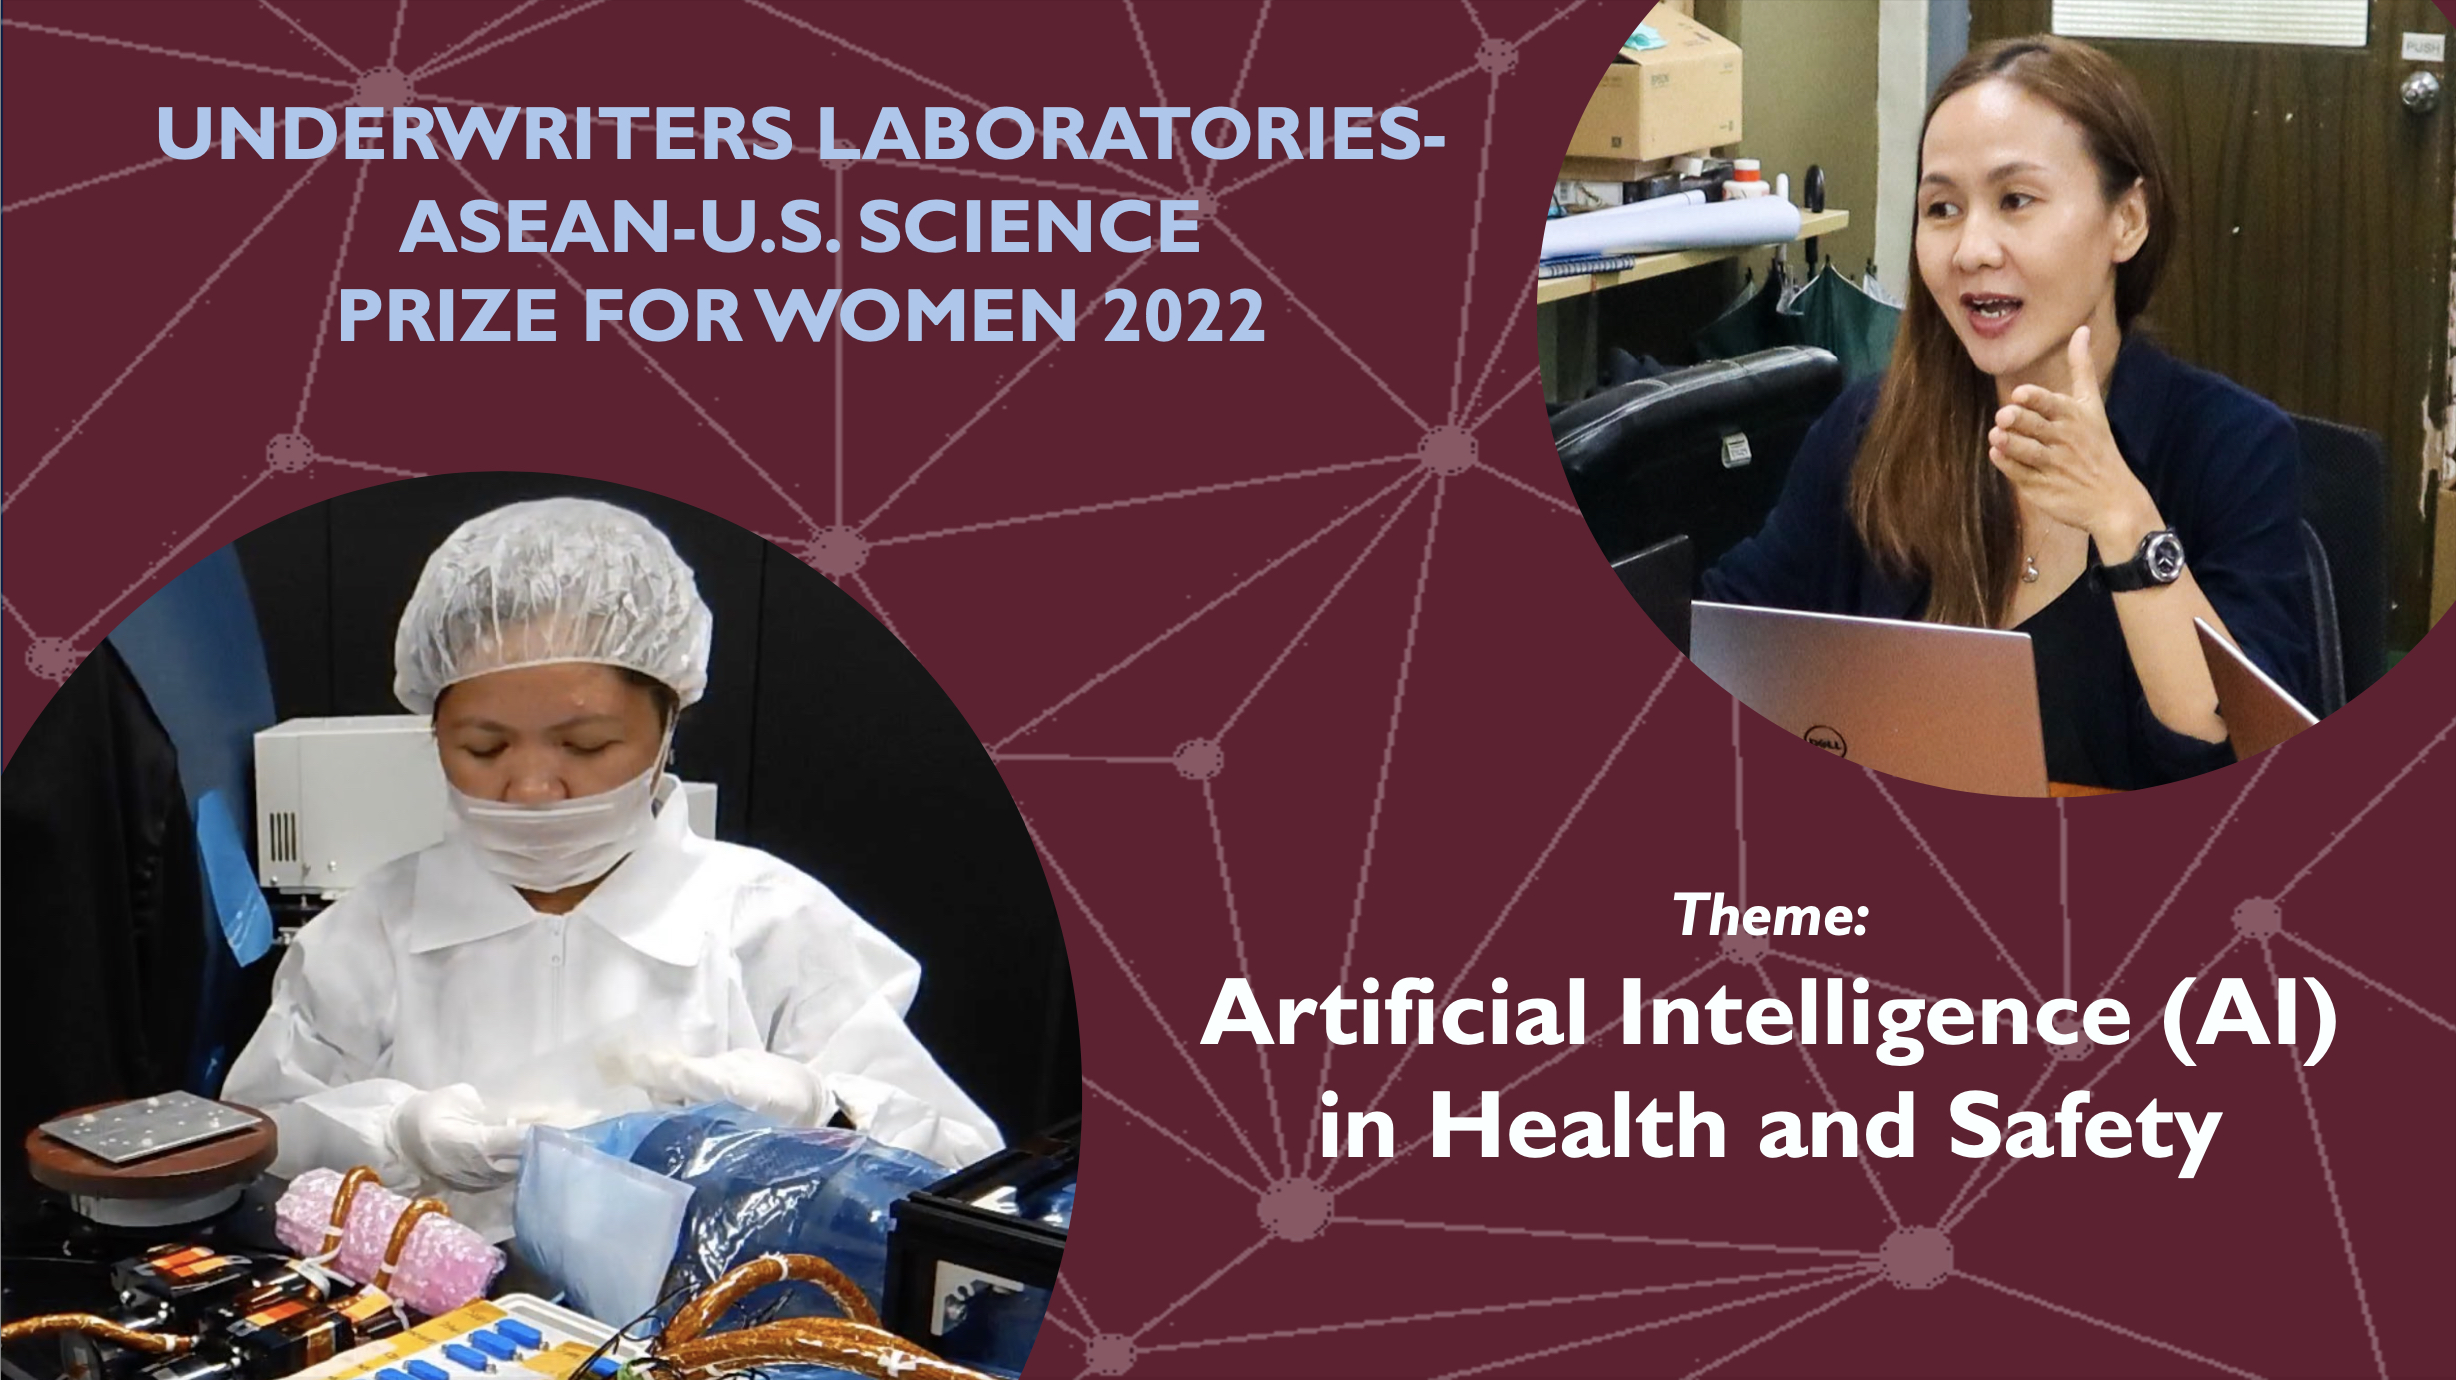 You are currently viewing 8<sup>th</sup> Underwriters Laboratories – ASEAN-U.S Science Prize for Women 2022